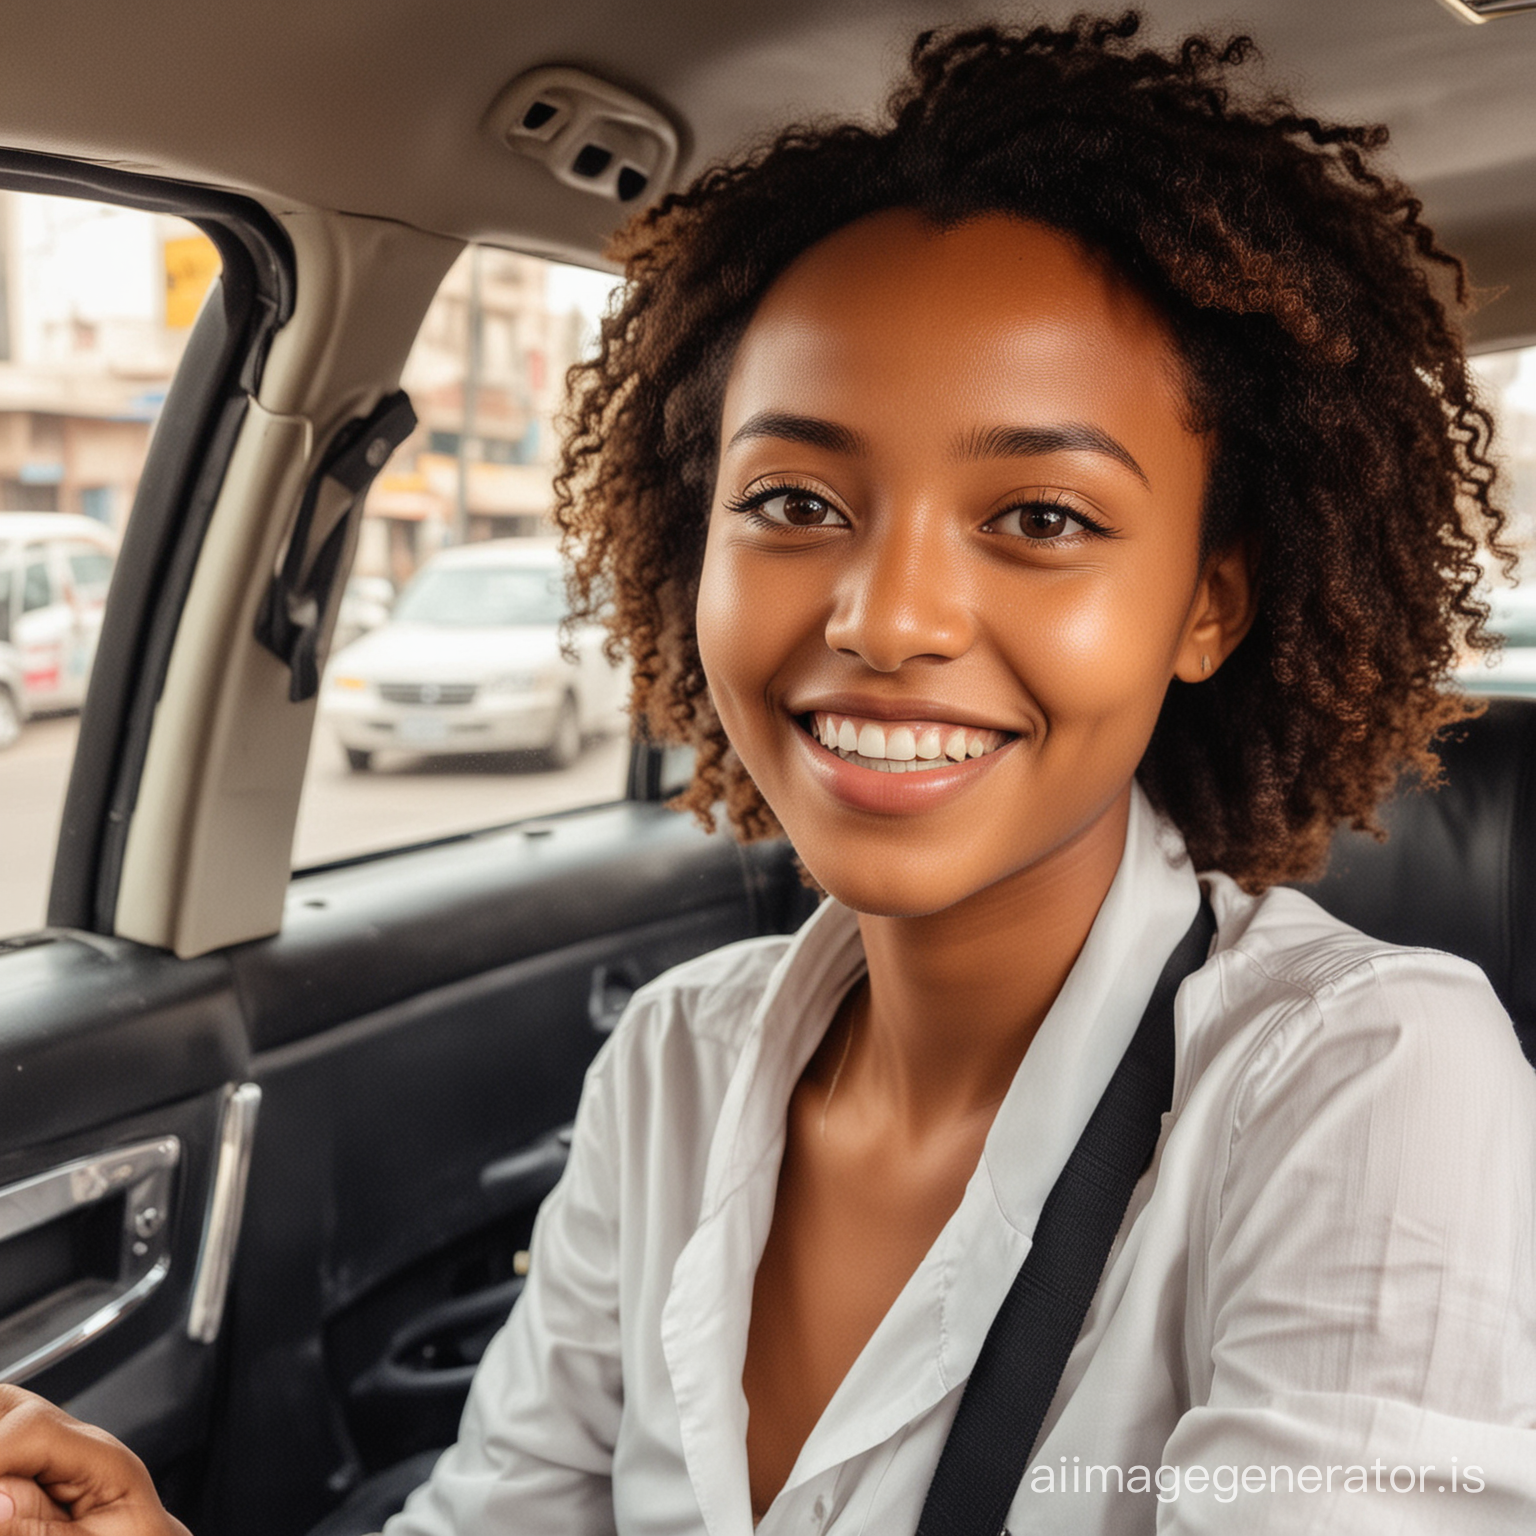 a beauty ethiopian girl inside uber taxi, and paying money, and smiling